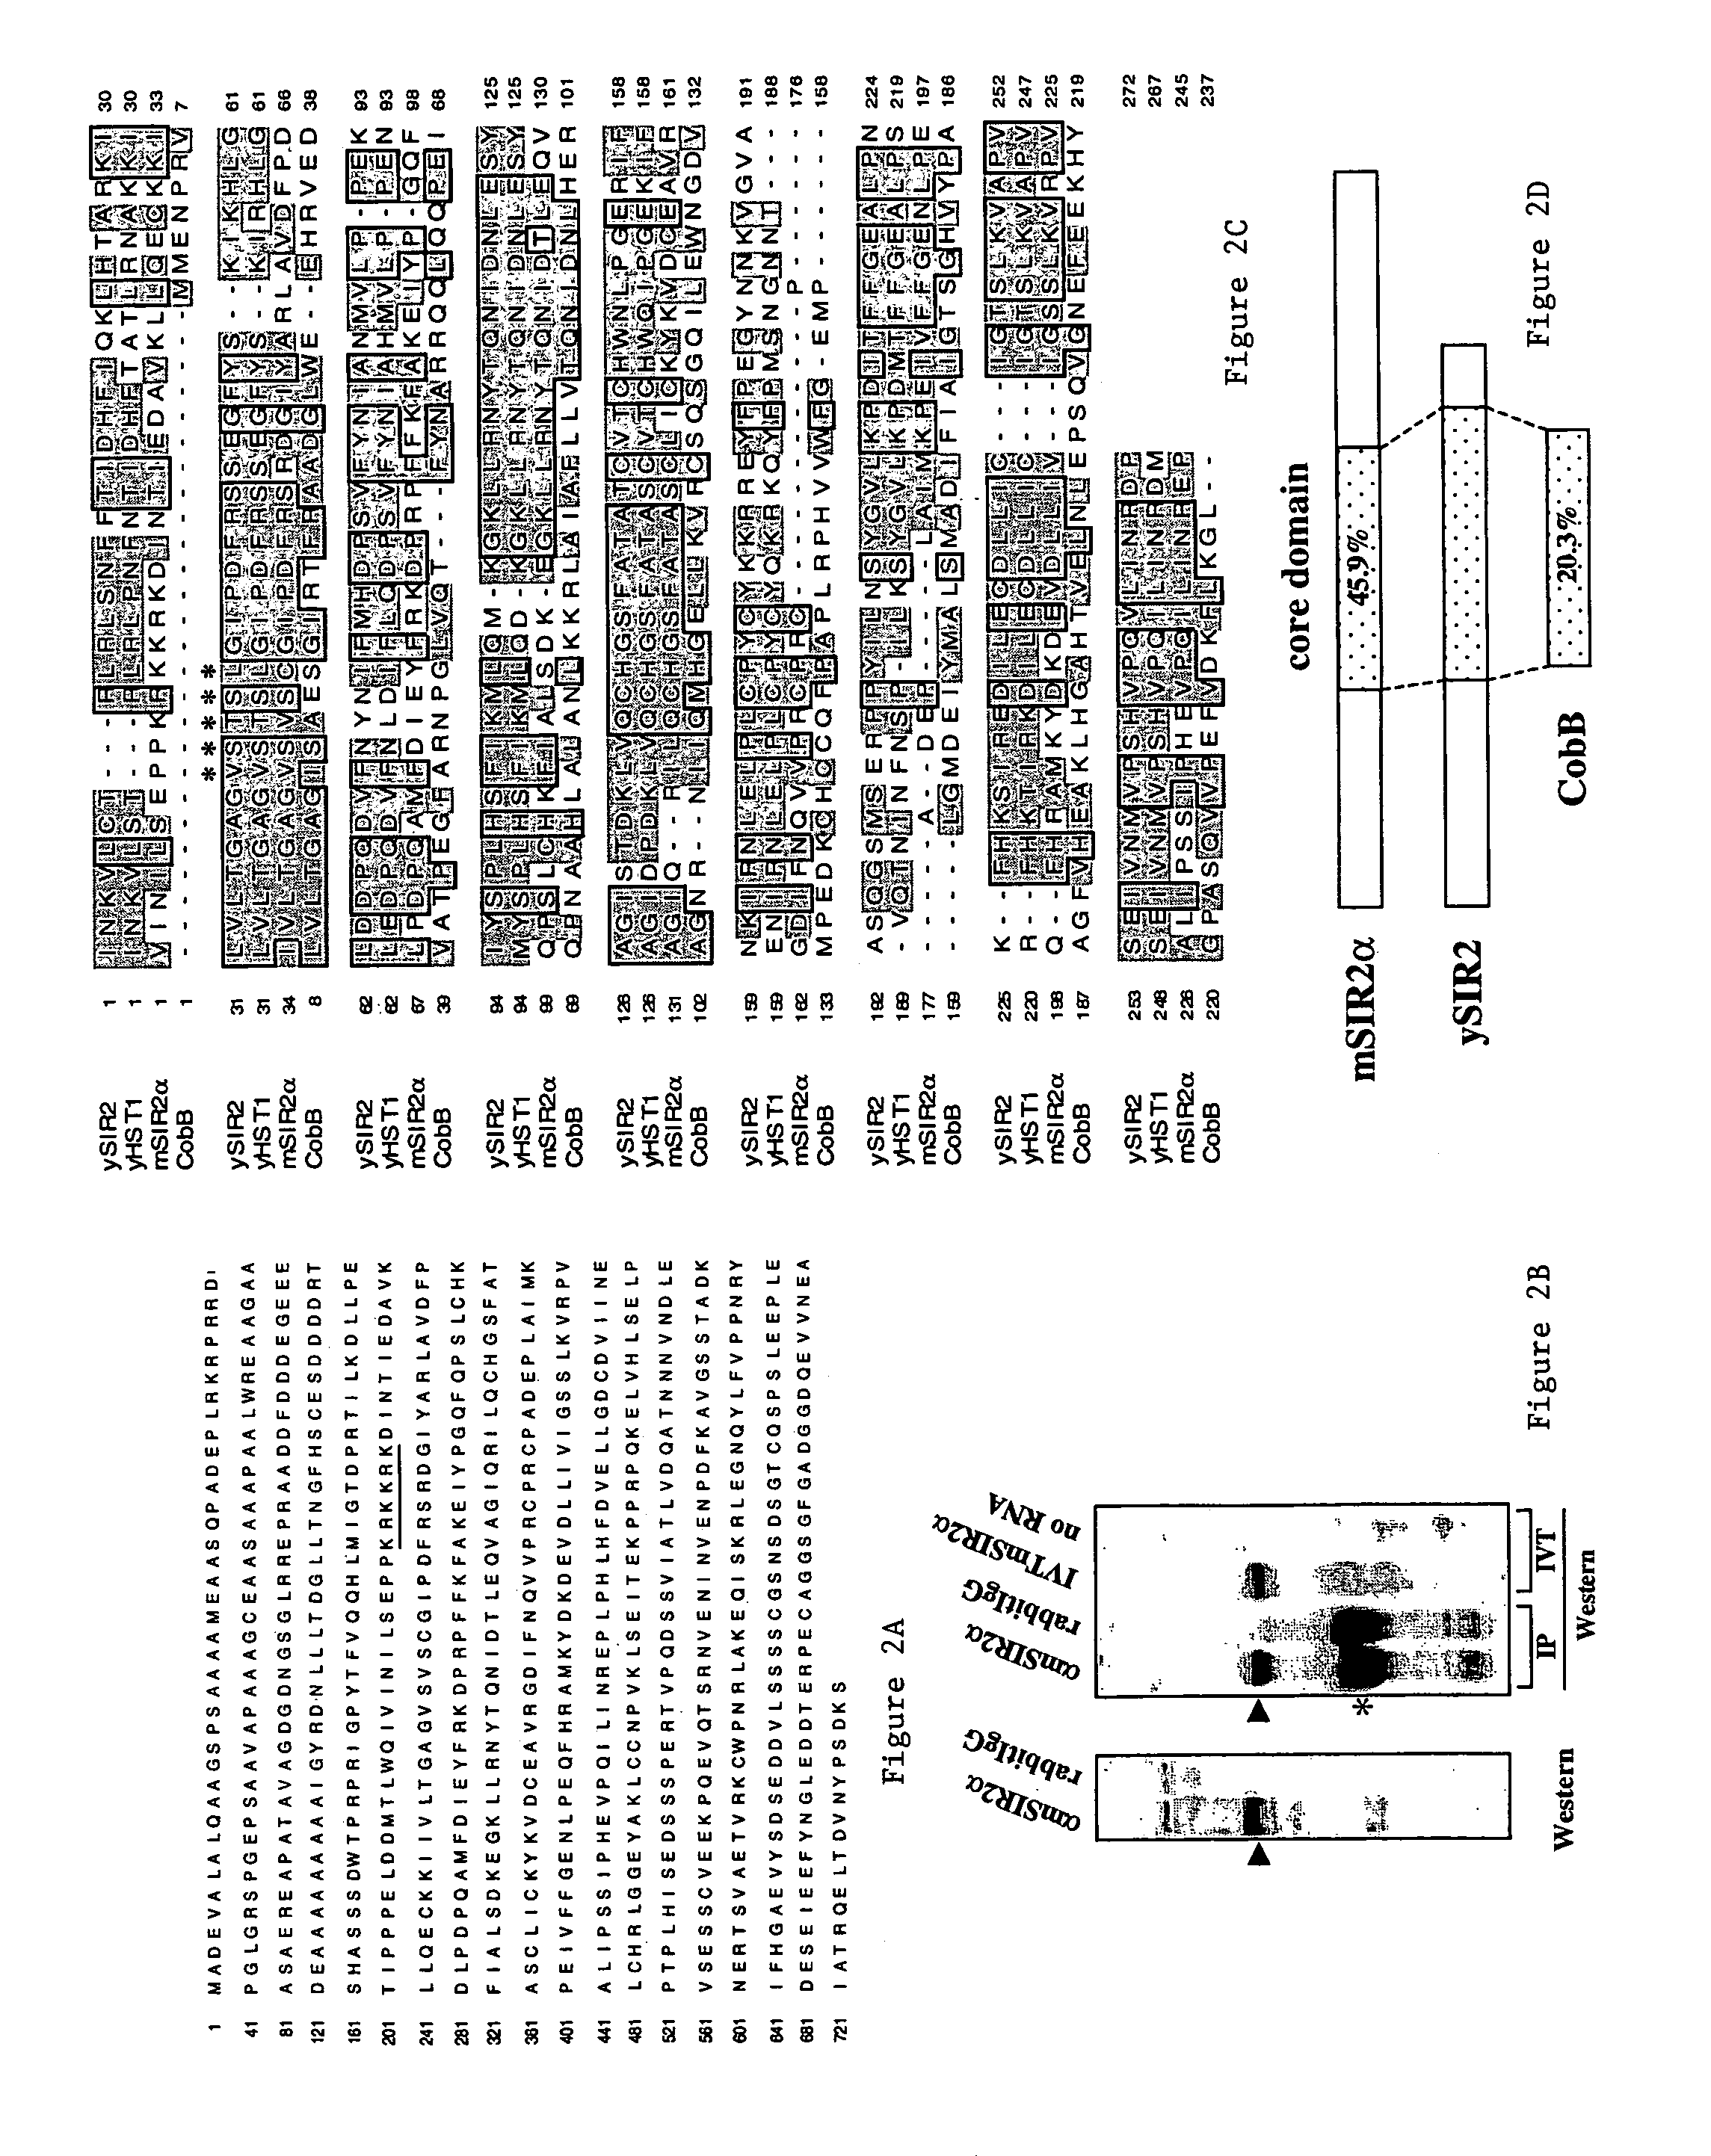 Methods for identifying agents that alter NAD-dependent deacetylation activity of a SIR2 protein